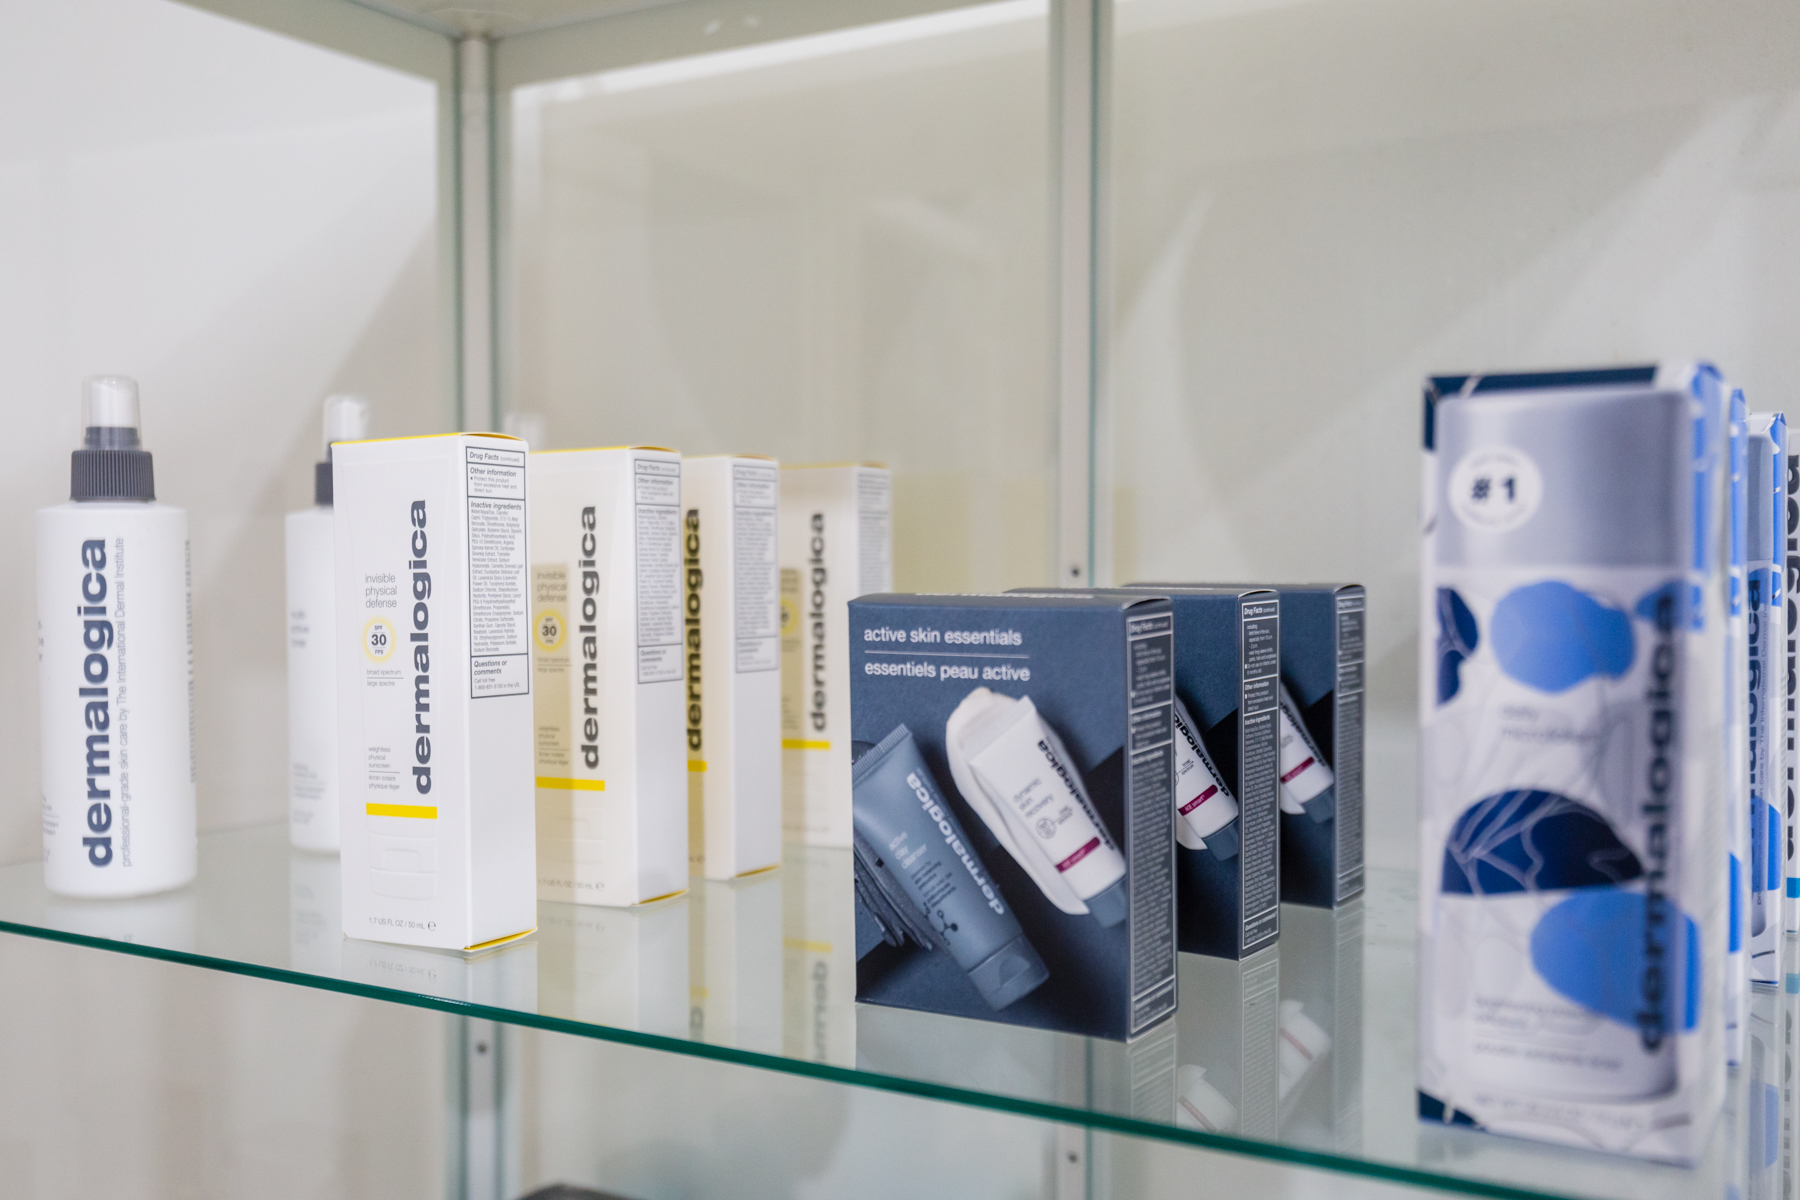 Dermalogica products displayed in shelf